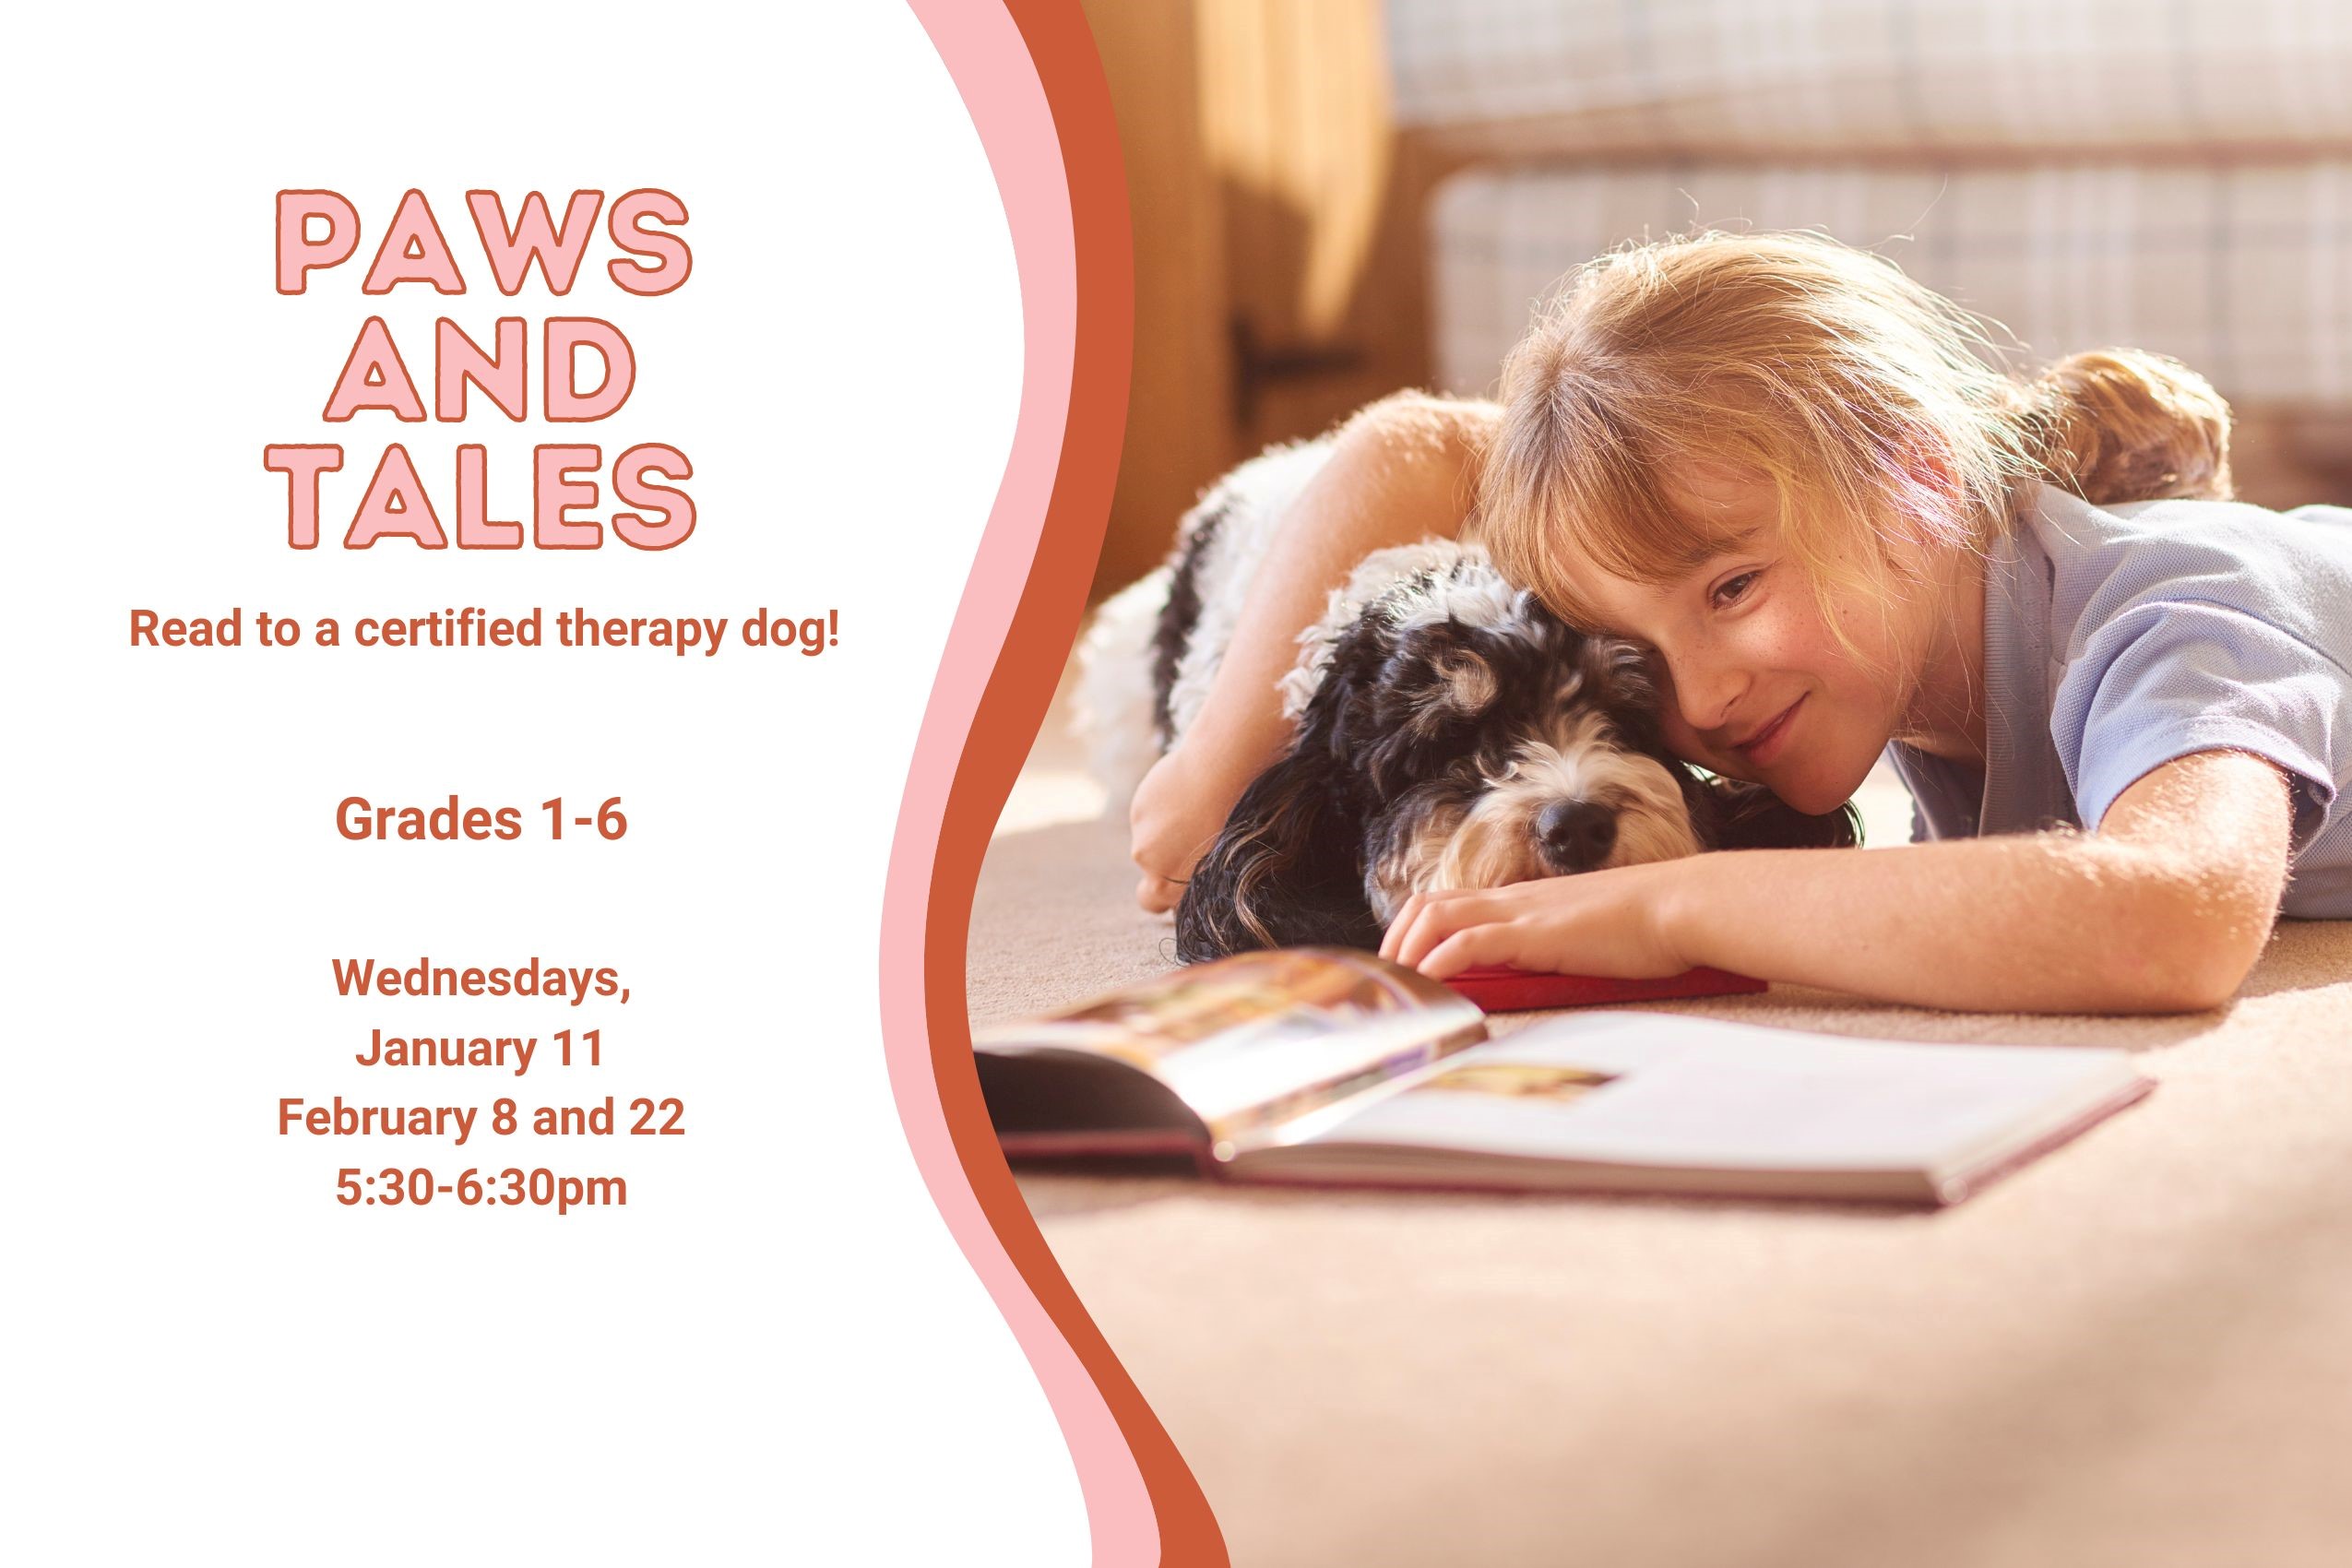 Paws and Tales Riverhead Free Library